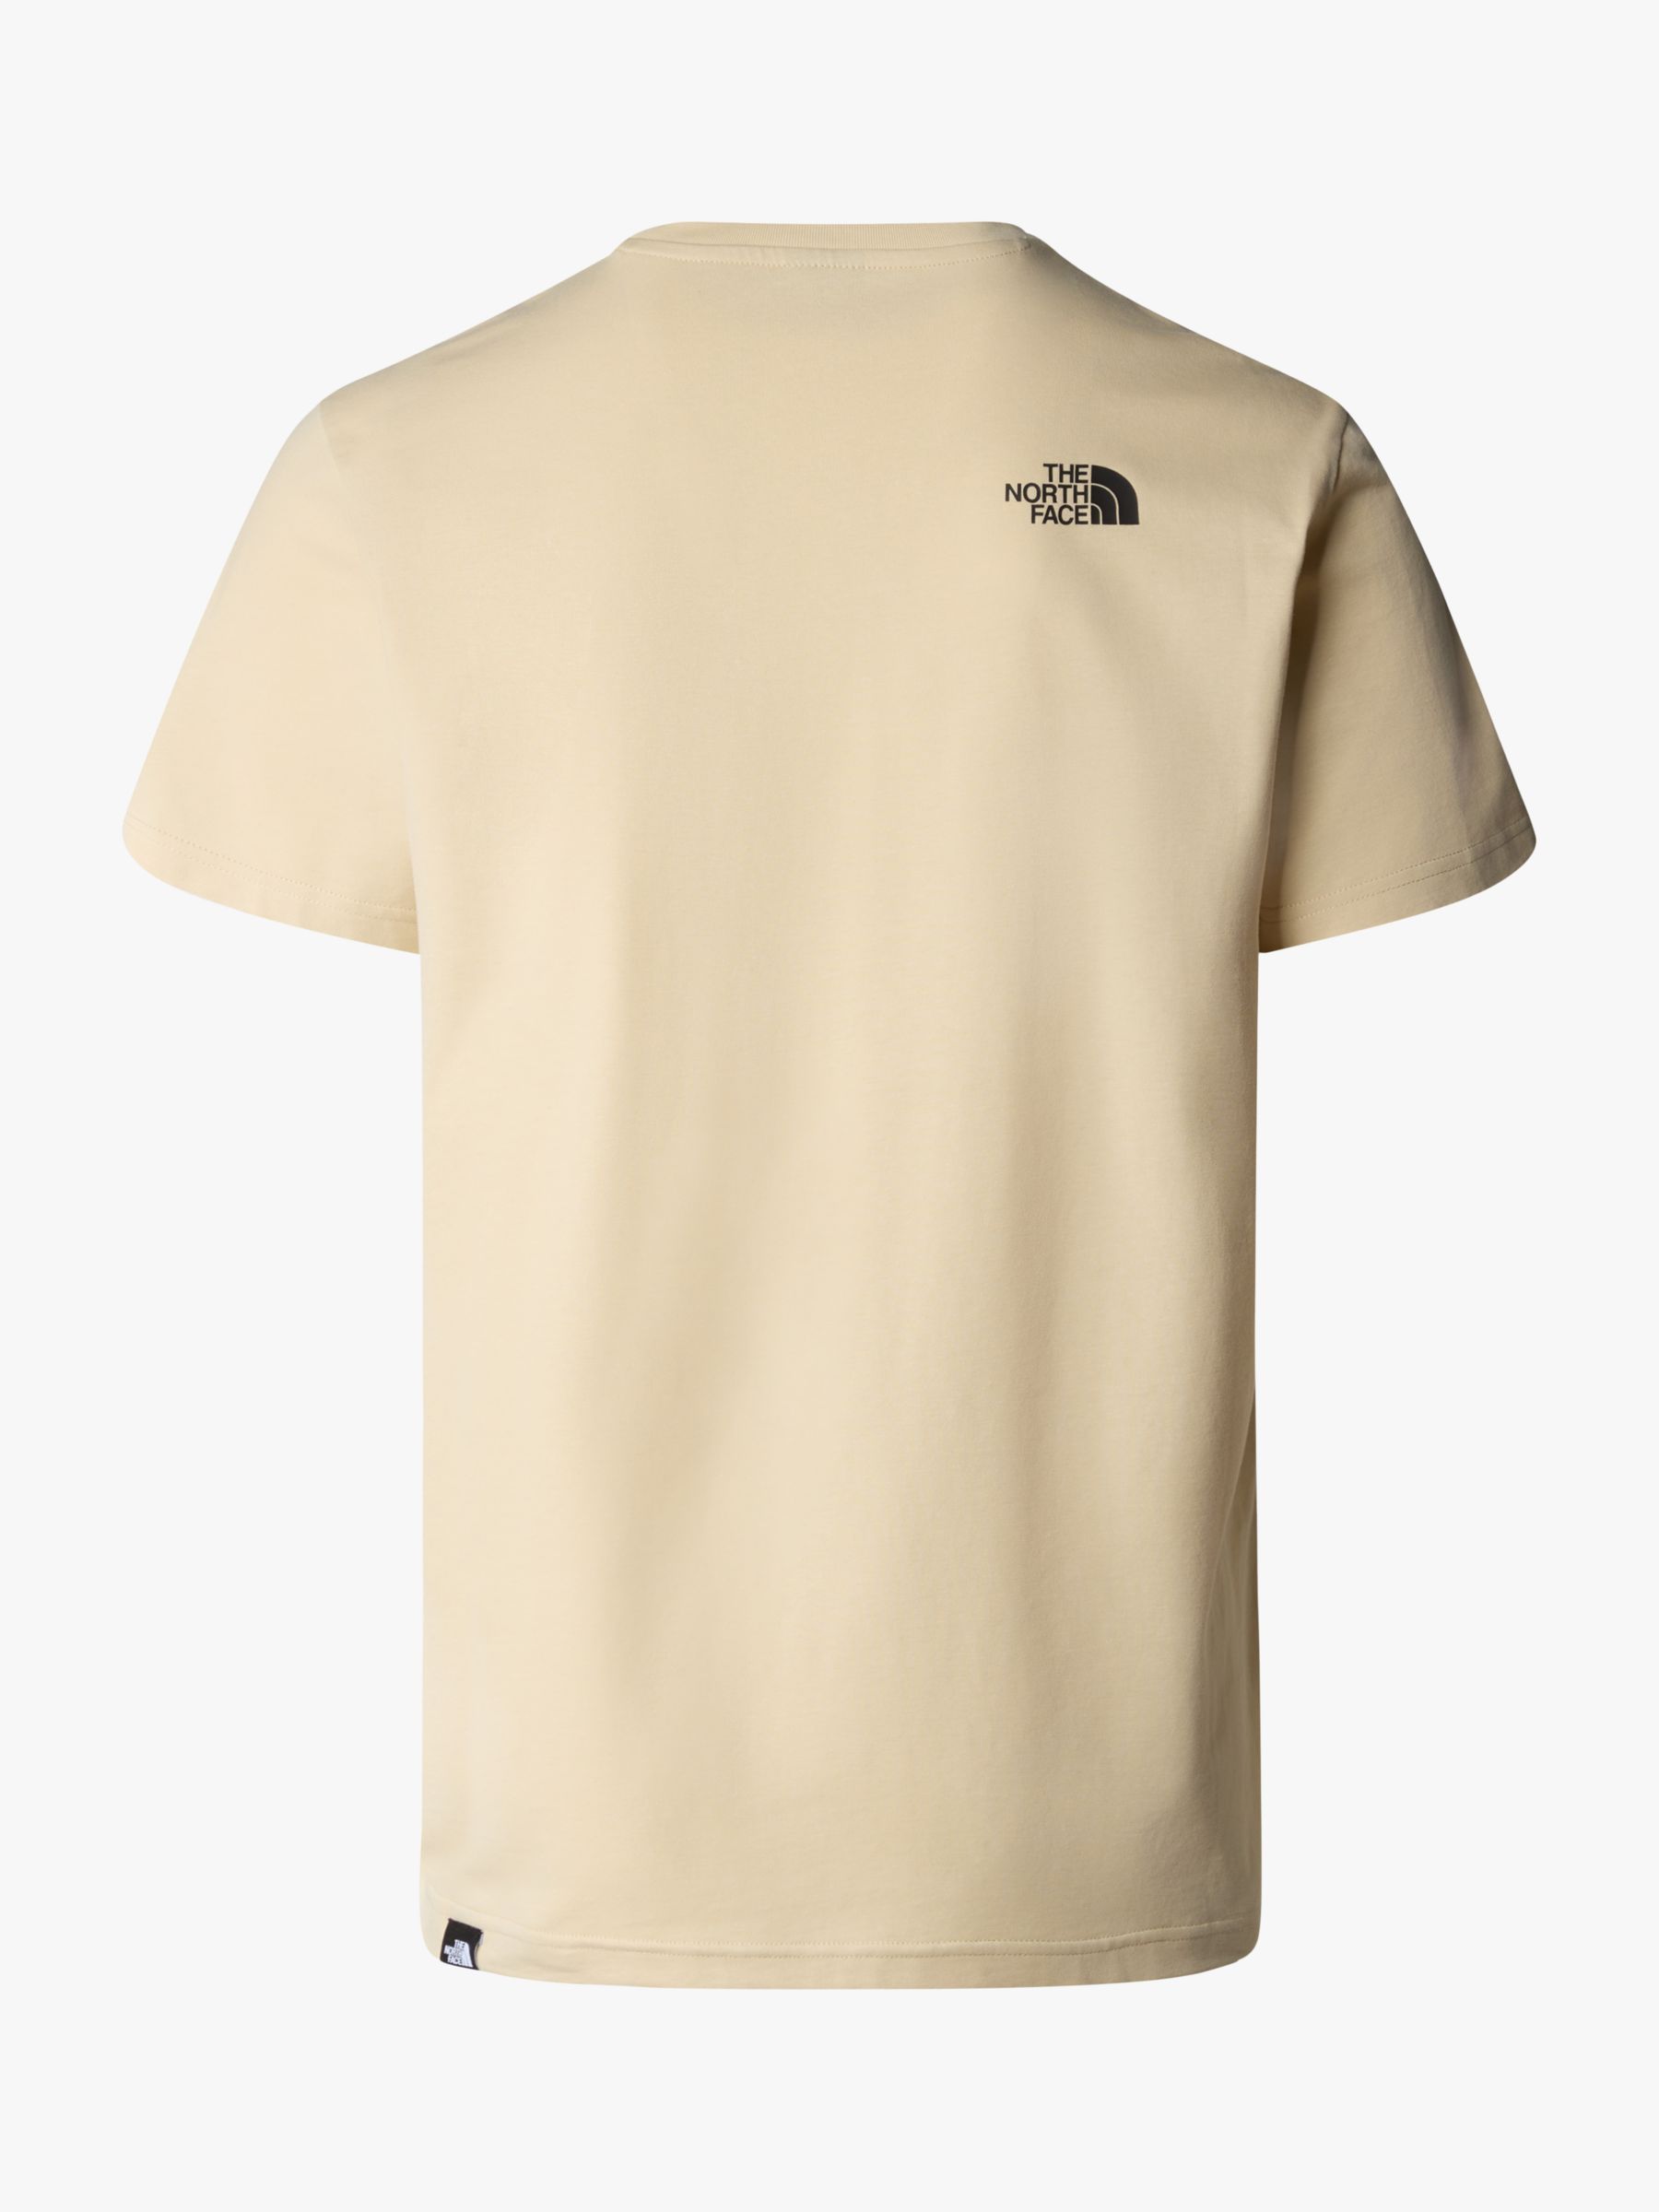 The North Face Short Sleeve Dome T-Shirt, Gravel, XL